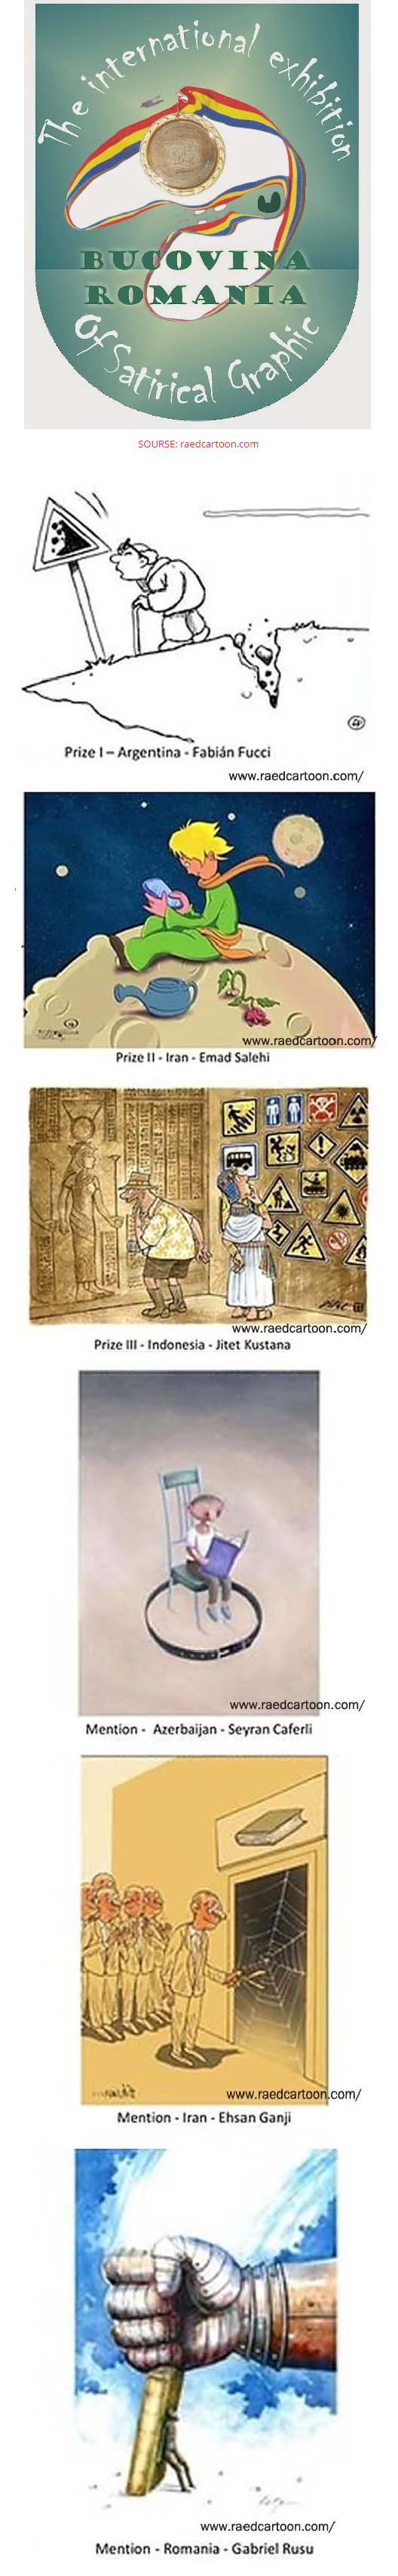 2Results of The International Exhibition of Satirical Graphic BUCOVINA - ROMANIA the 12 th Edition, 2018 _ HUMORTOONS.png